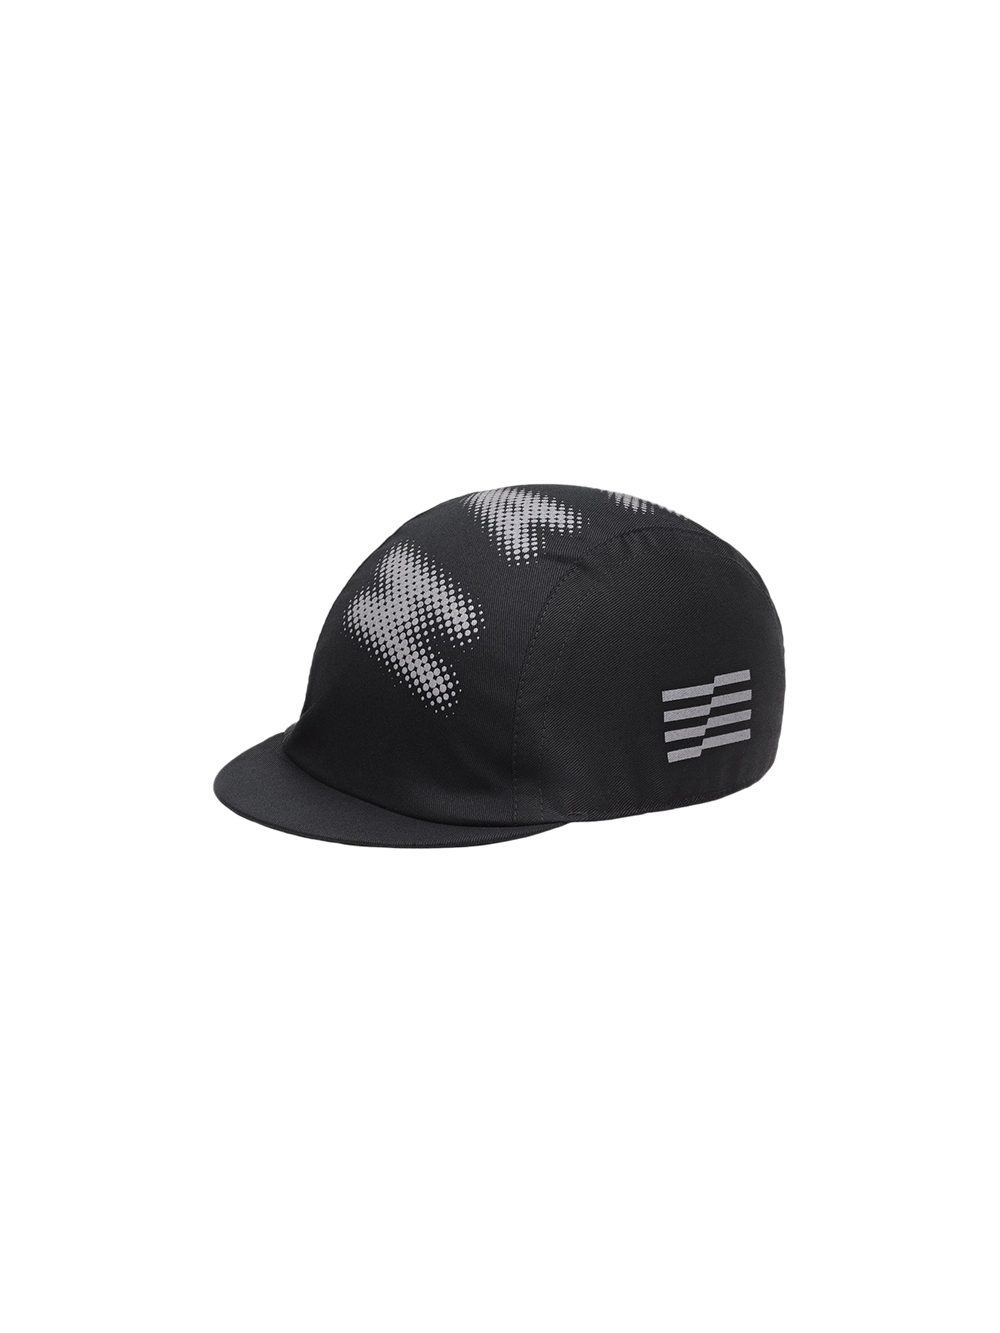 Product Image for Halftone Cap